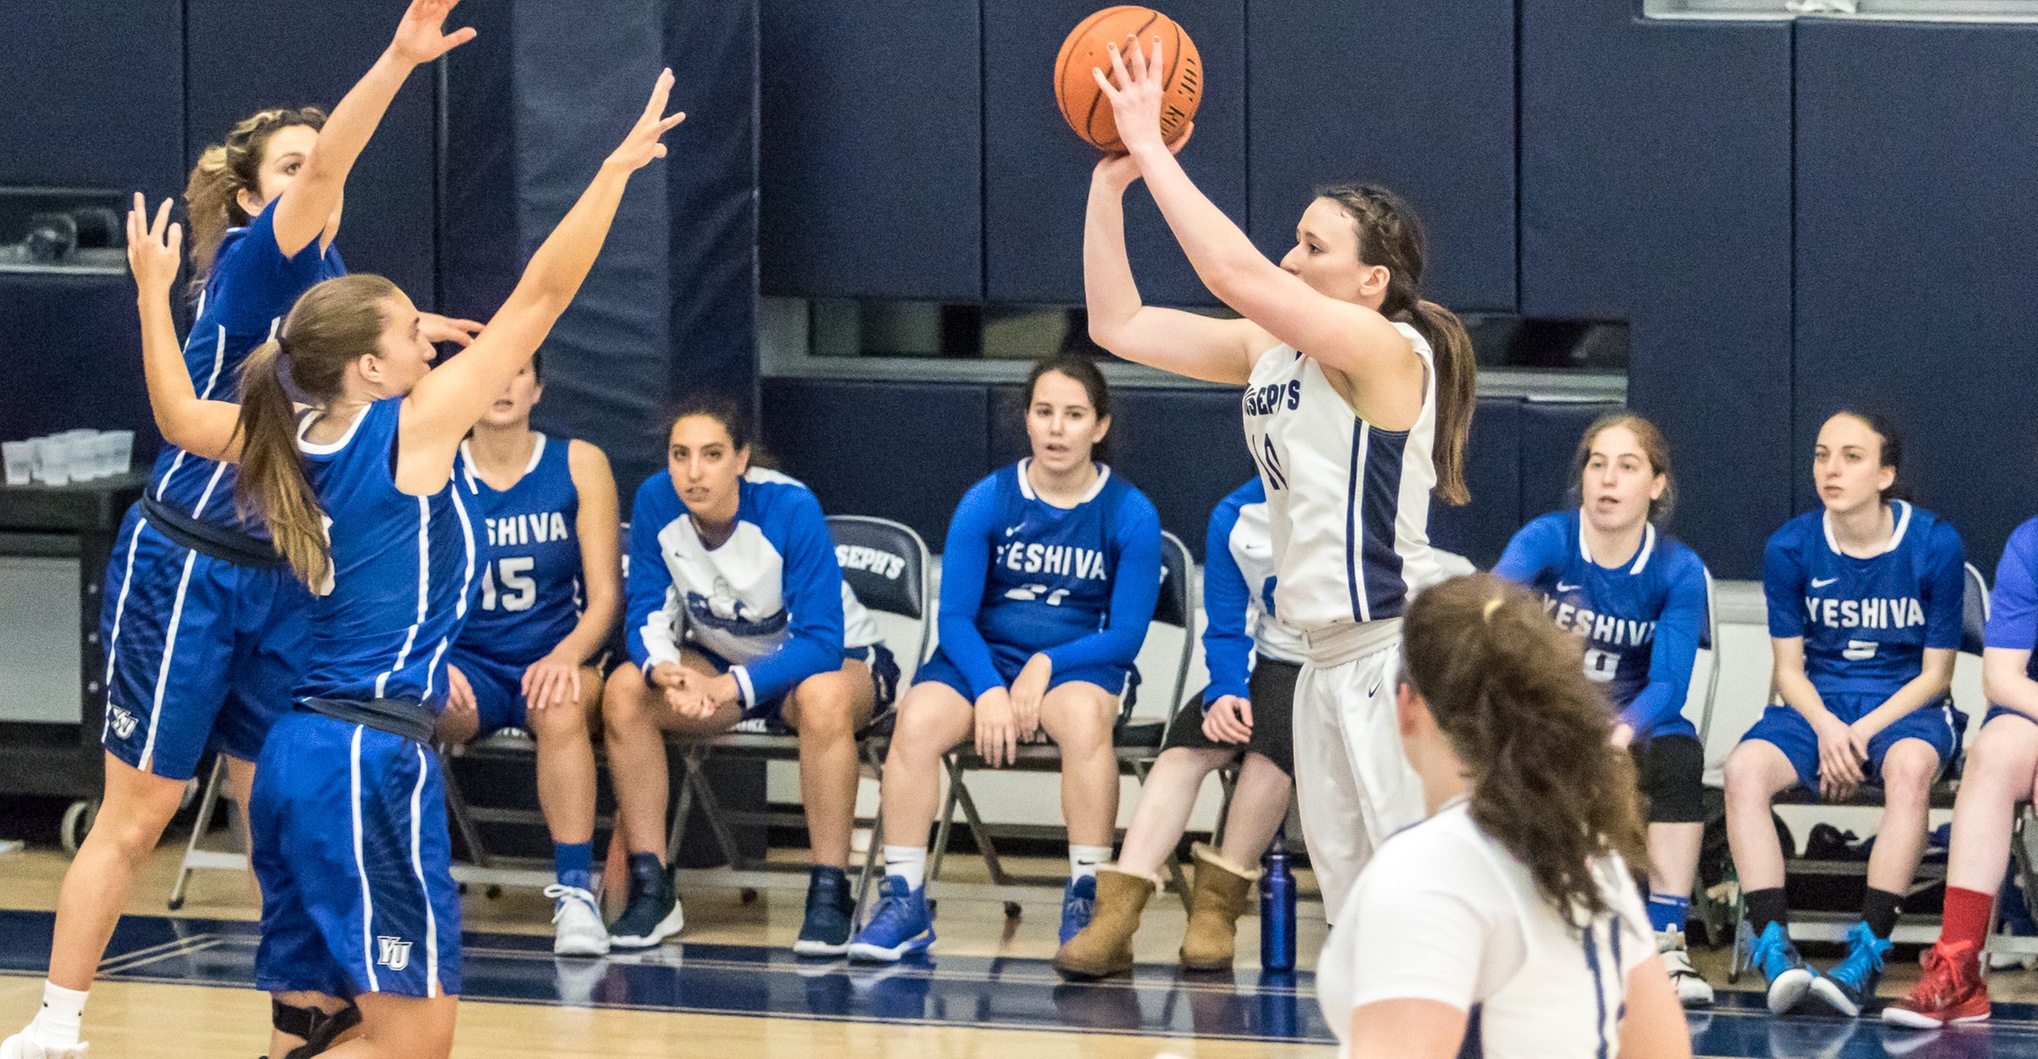 Women’s Basketball Nearly Upsets First-Place Mount Saint Mary; Bears Still Clinch Playoff Berth